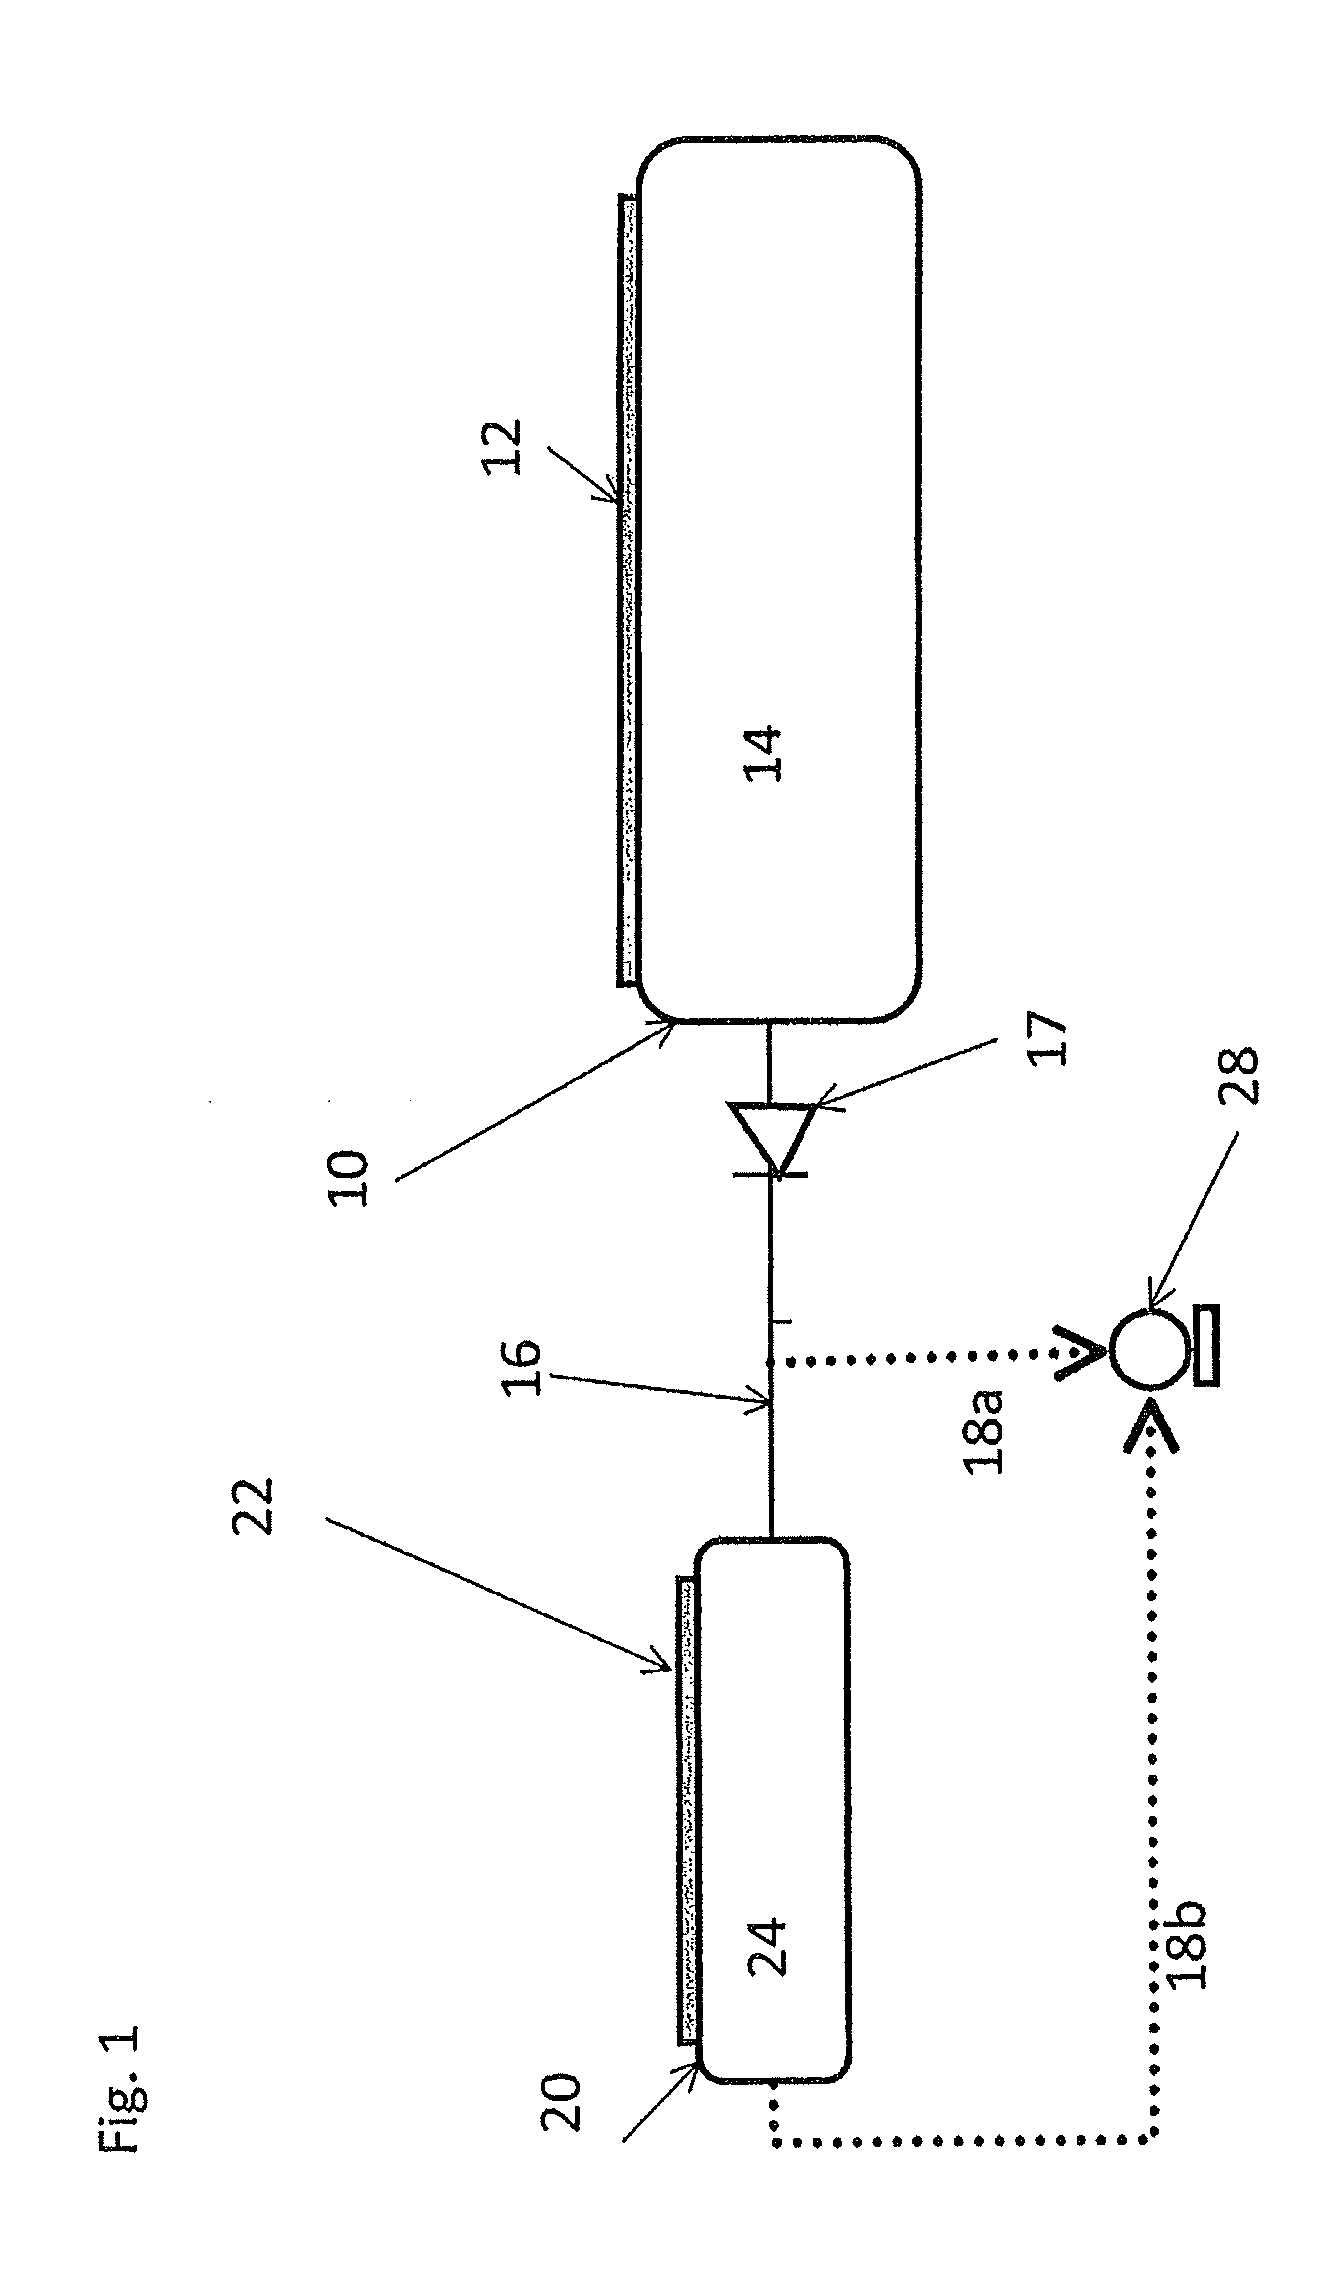 Method for storing and delivering ammonia from solid storage materials using a vacuum pump